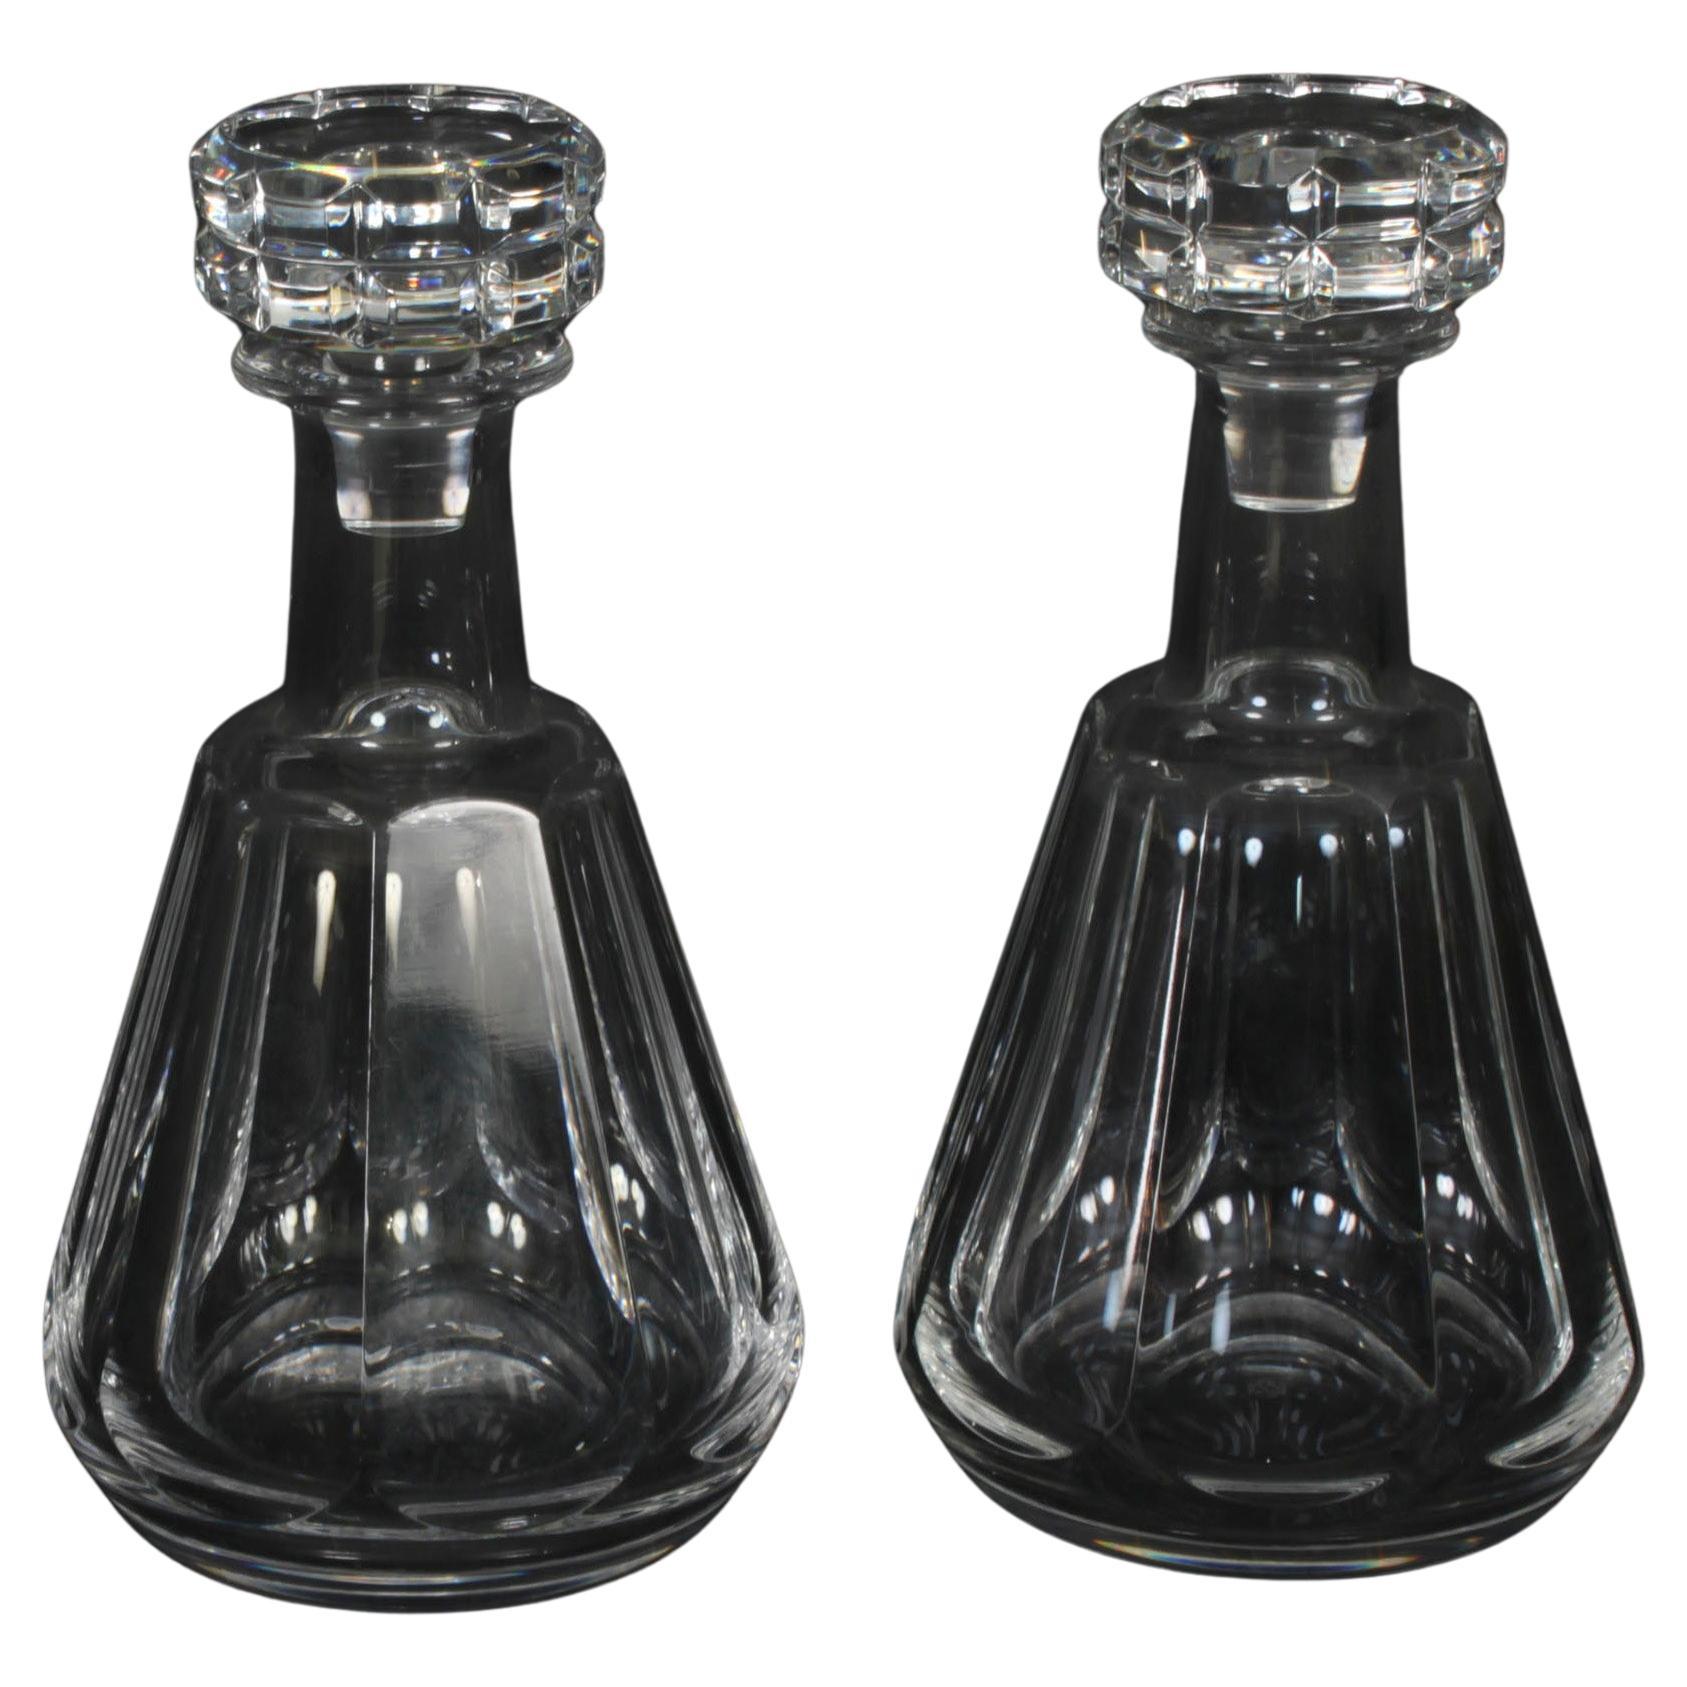 Vintage Pair of Harcourt Talleyrand Crystal Decanters by Baccarat Mid 20th C For Sale